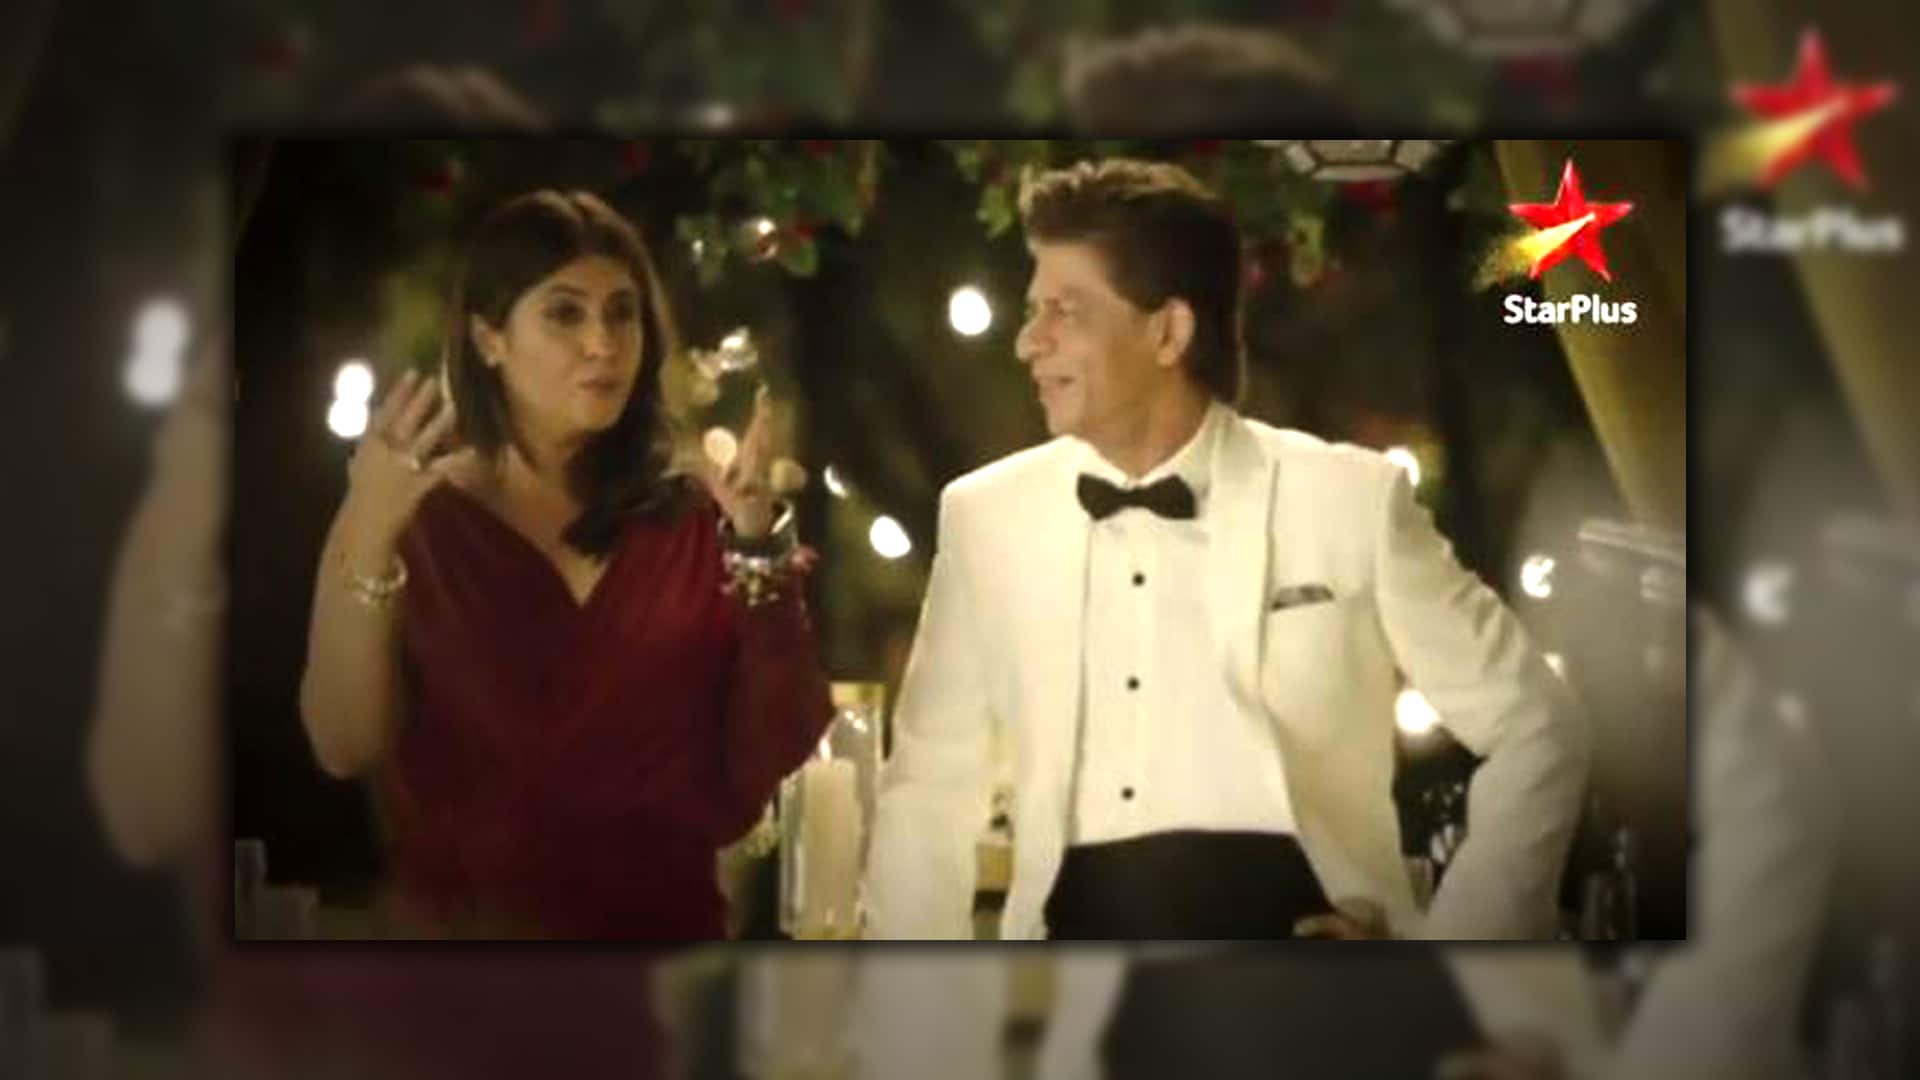 shahrukh khan charges crores for tv serial promo